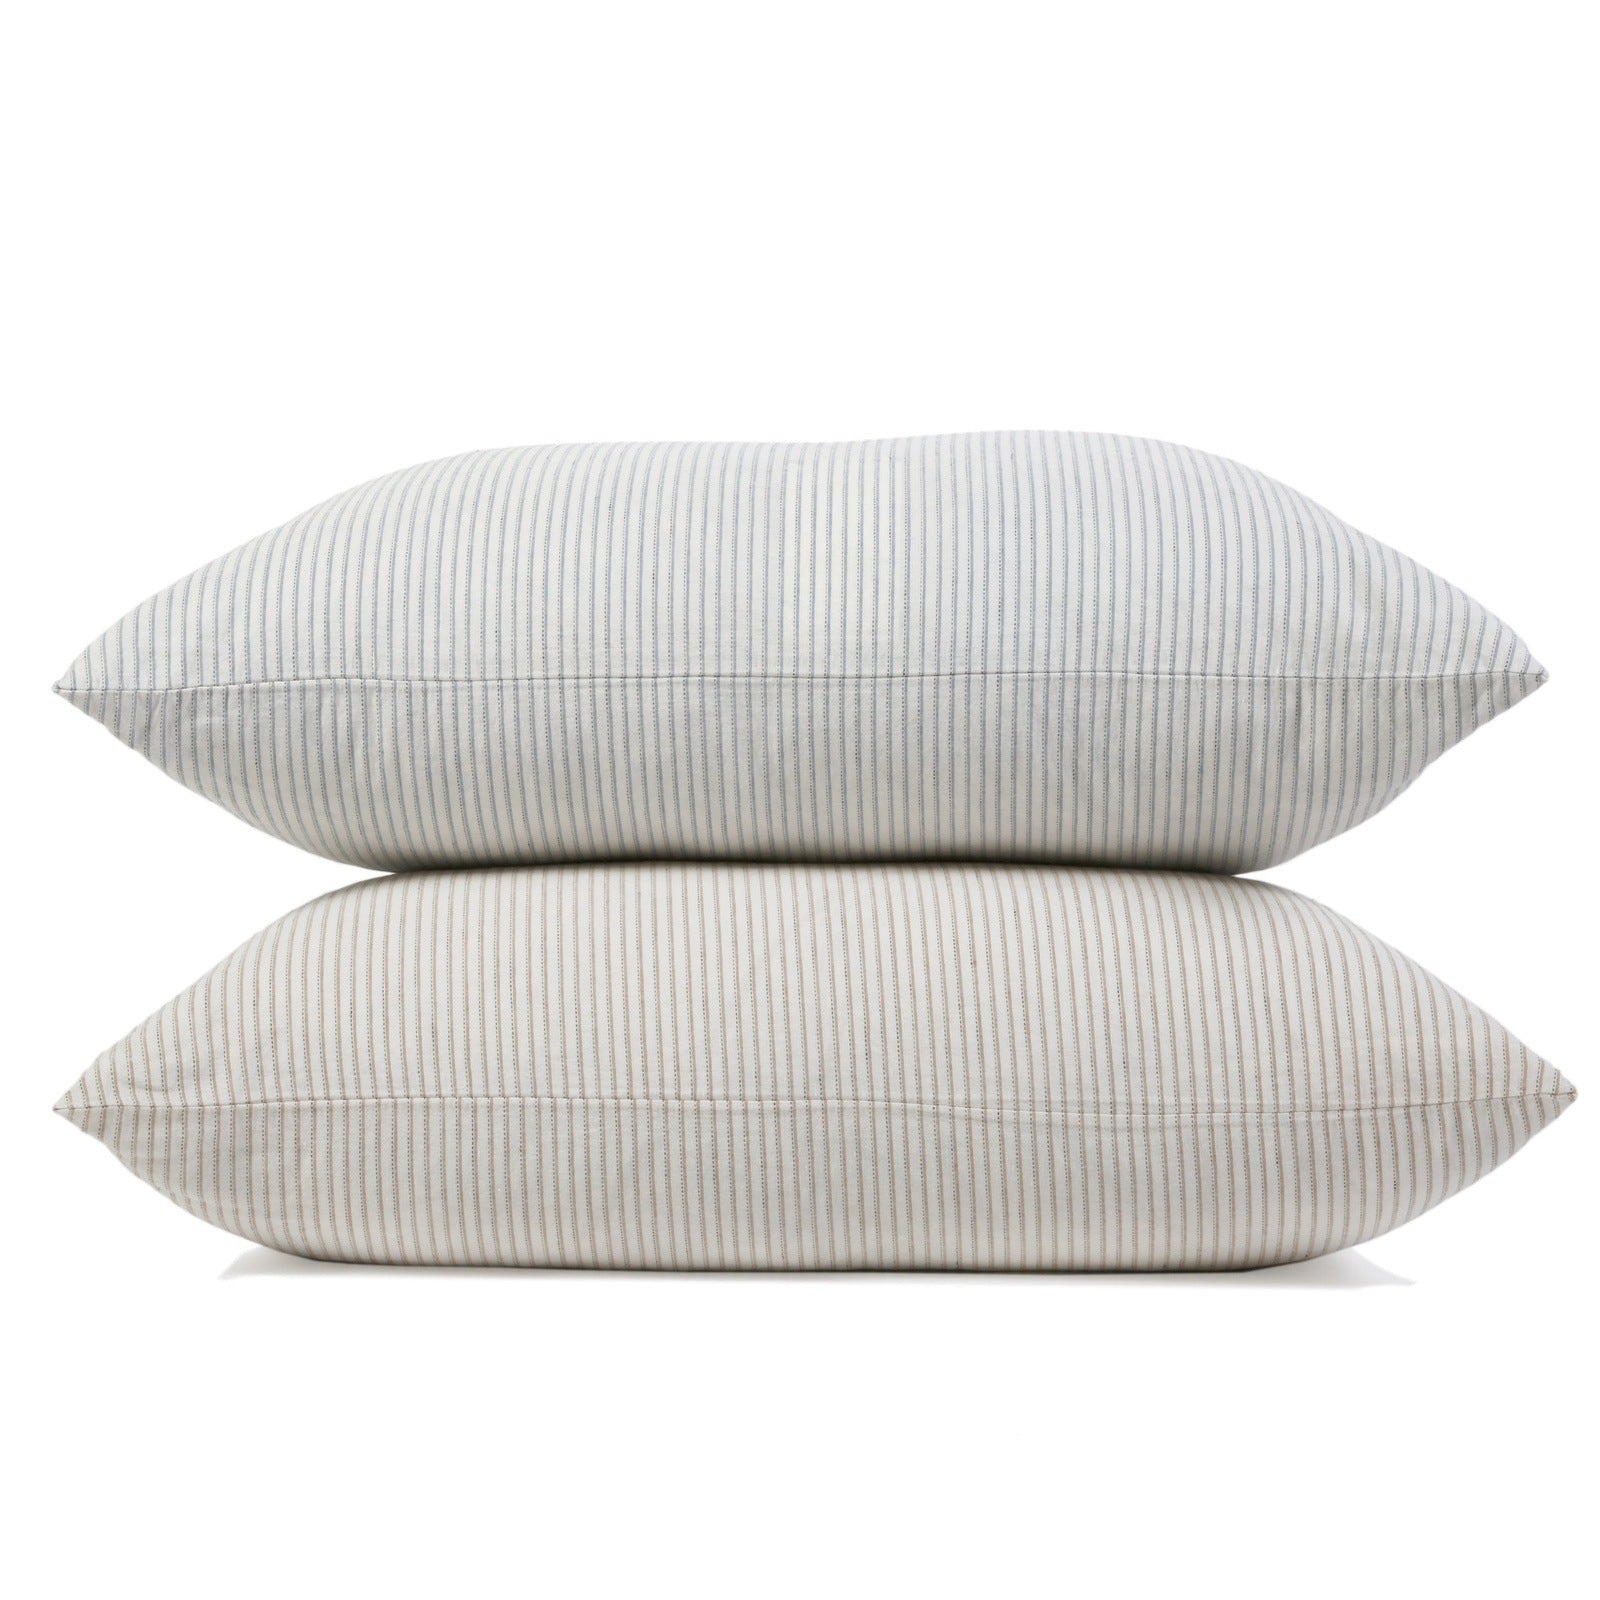 Connor Ivory/Denim Big Pillow by Pom at Home